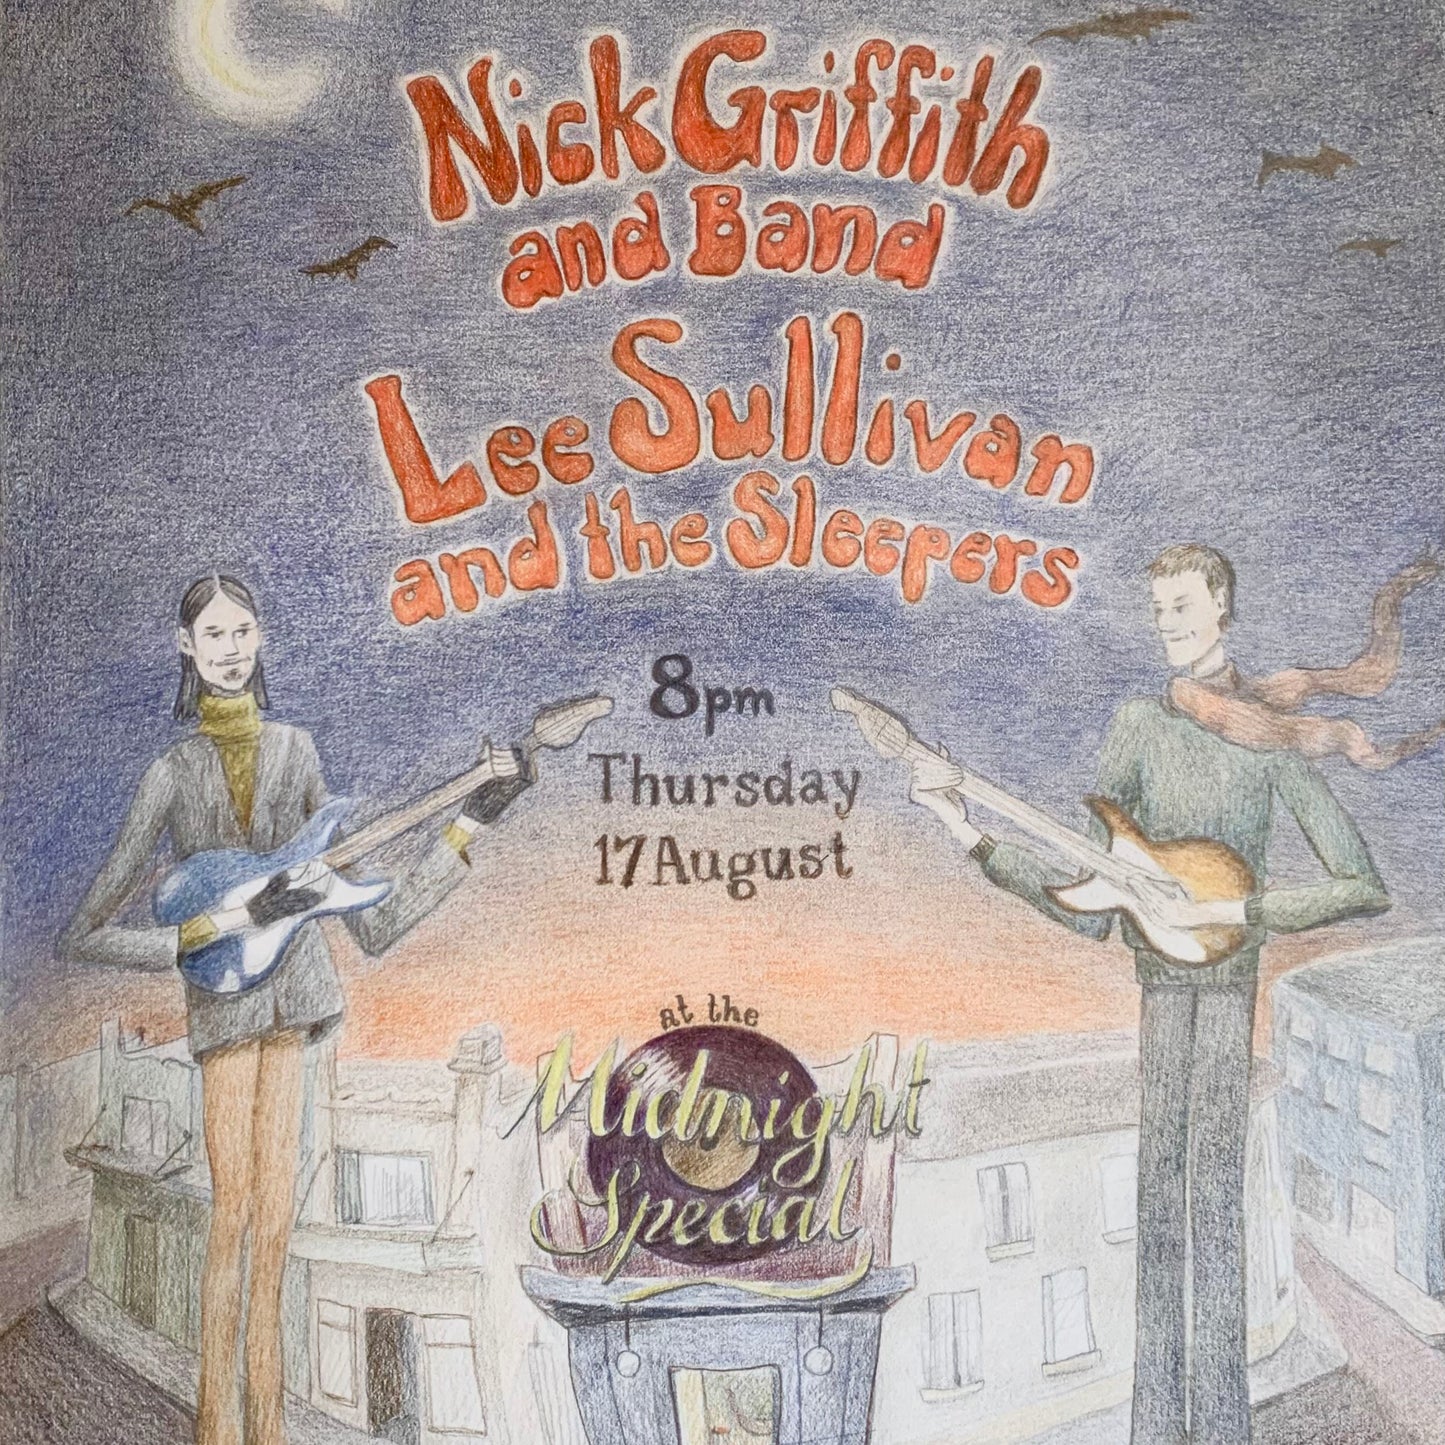 Nick Griffith Band / Lee Sullivan & the Sleepers LIVE